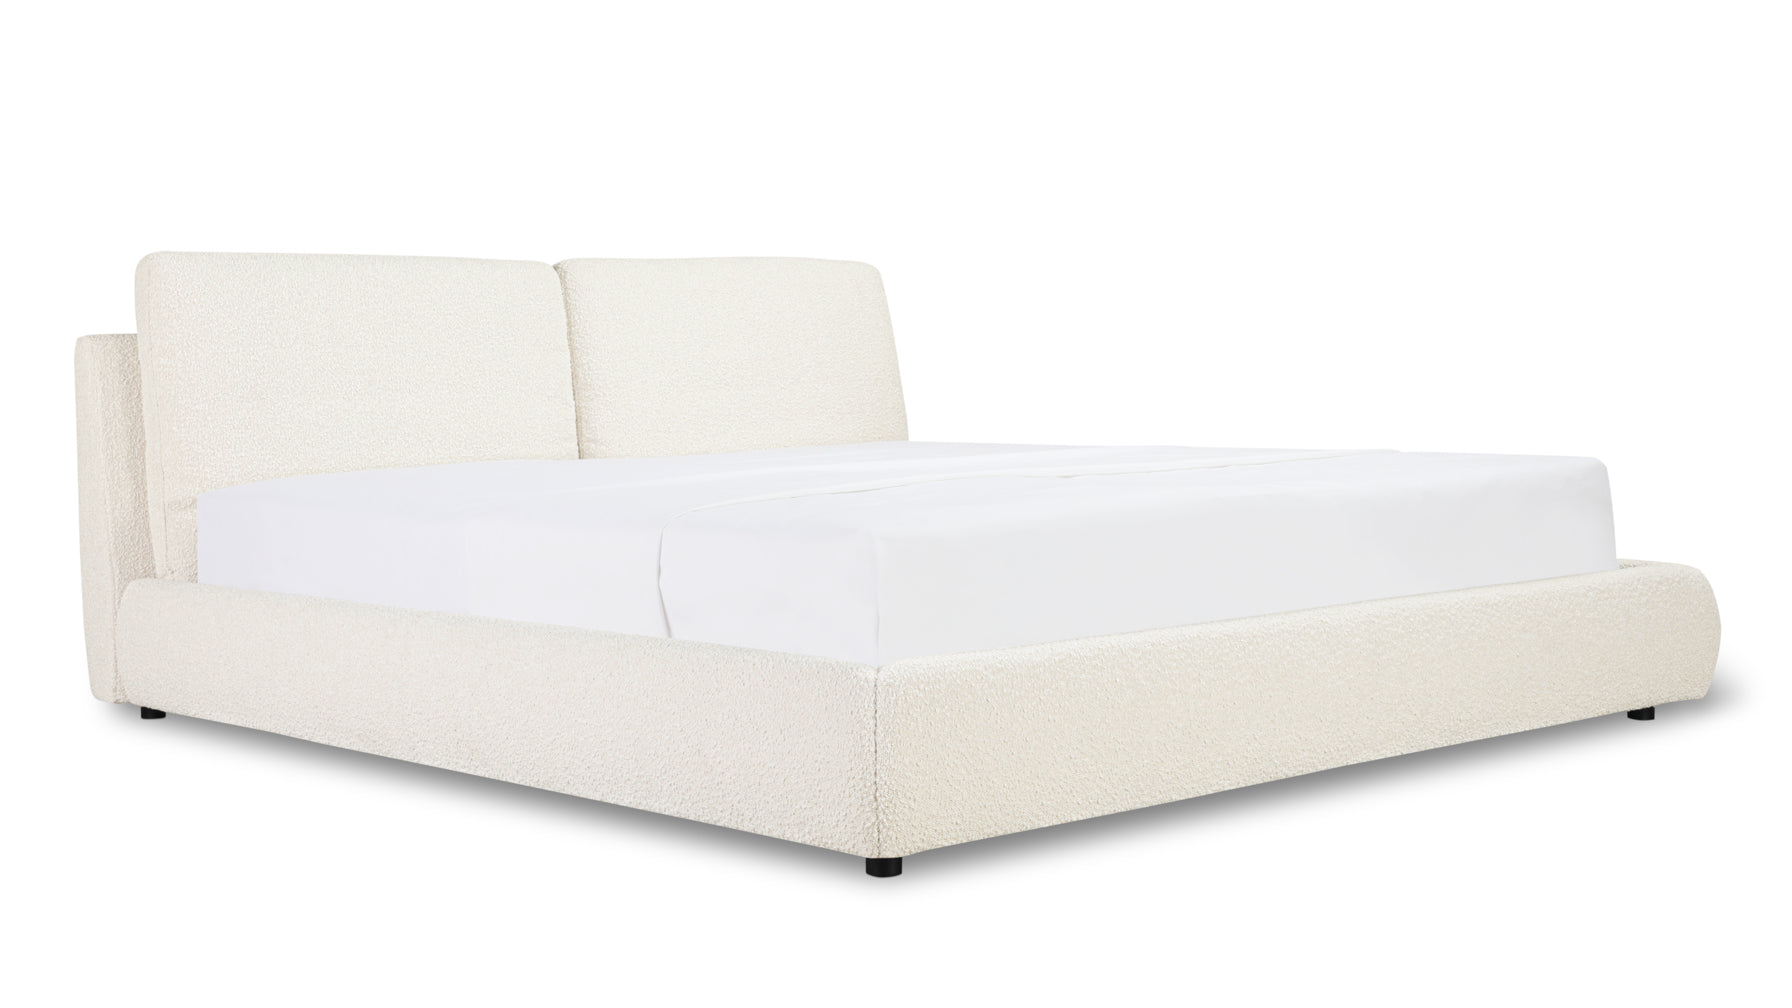 Cloud Bed with Storage, King, Cream Boucle - Image 6